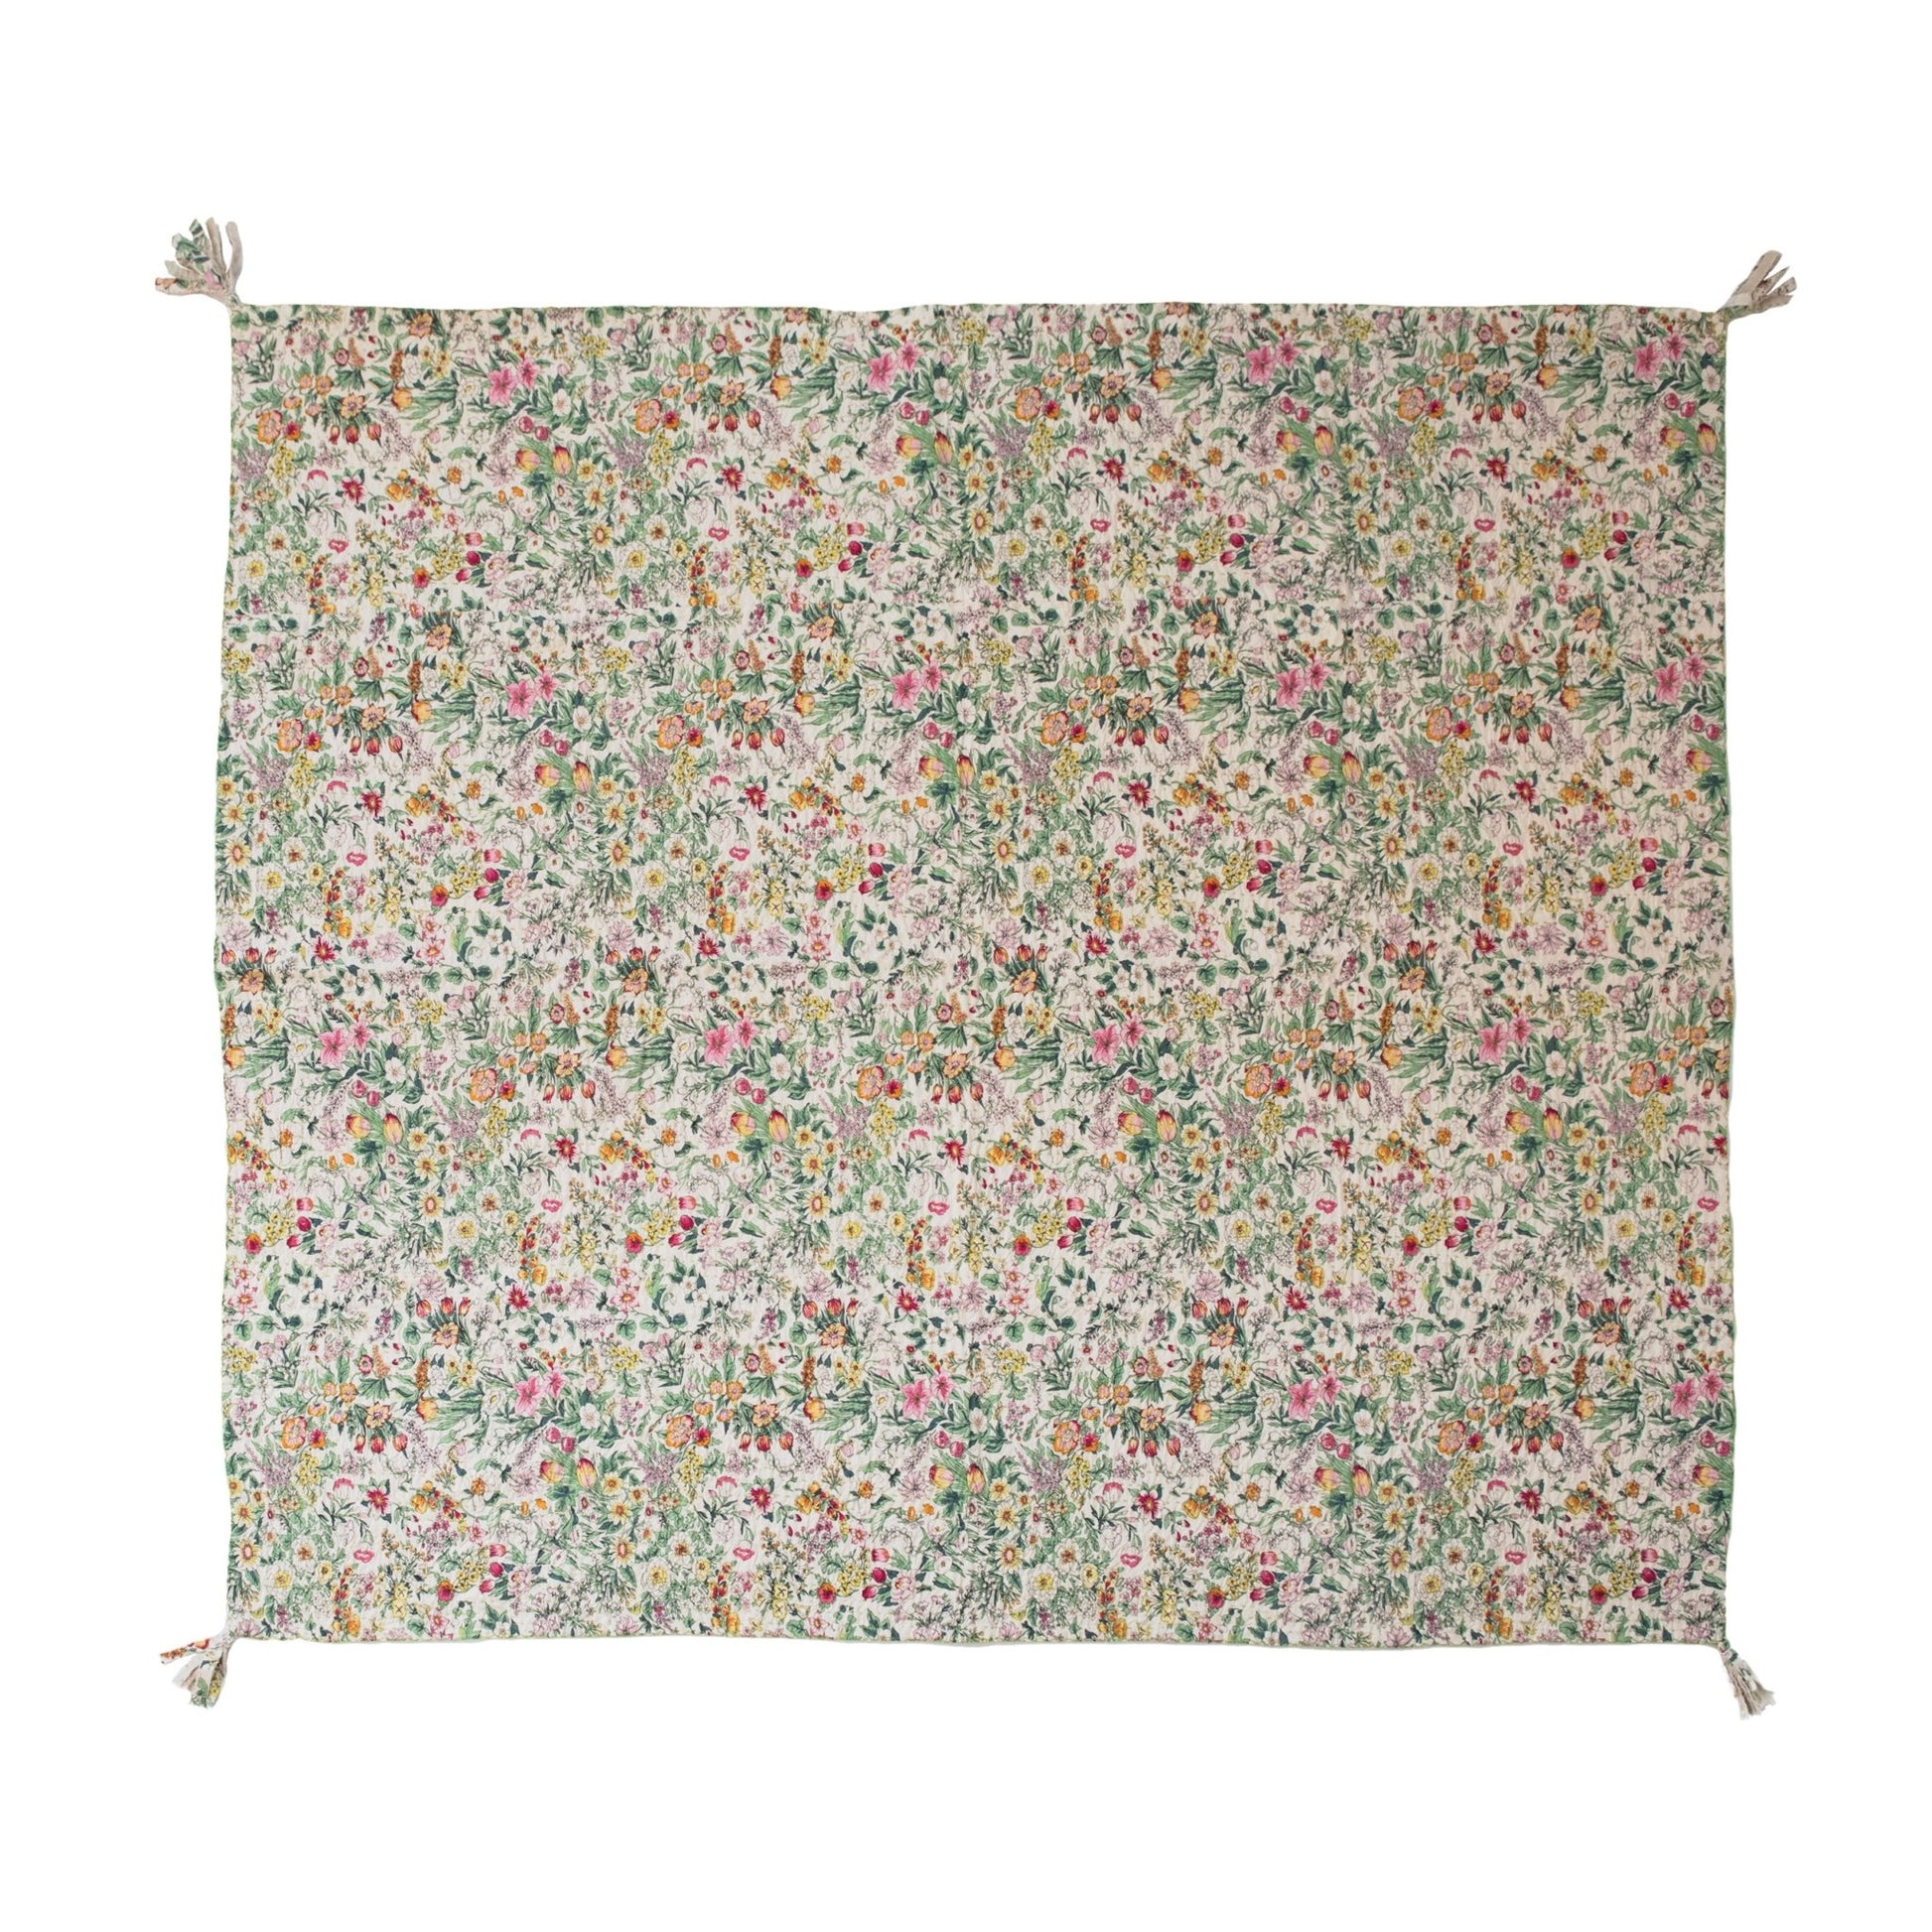 Quilted Cotton Throw with Floral Pattern - Royalties